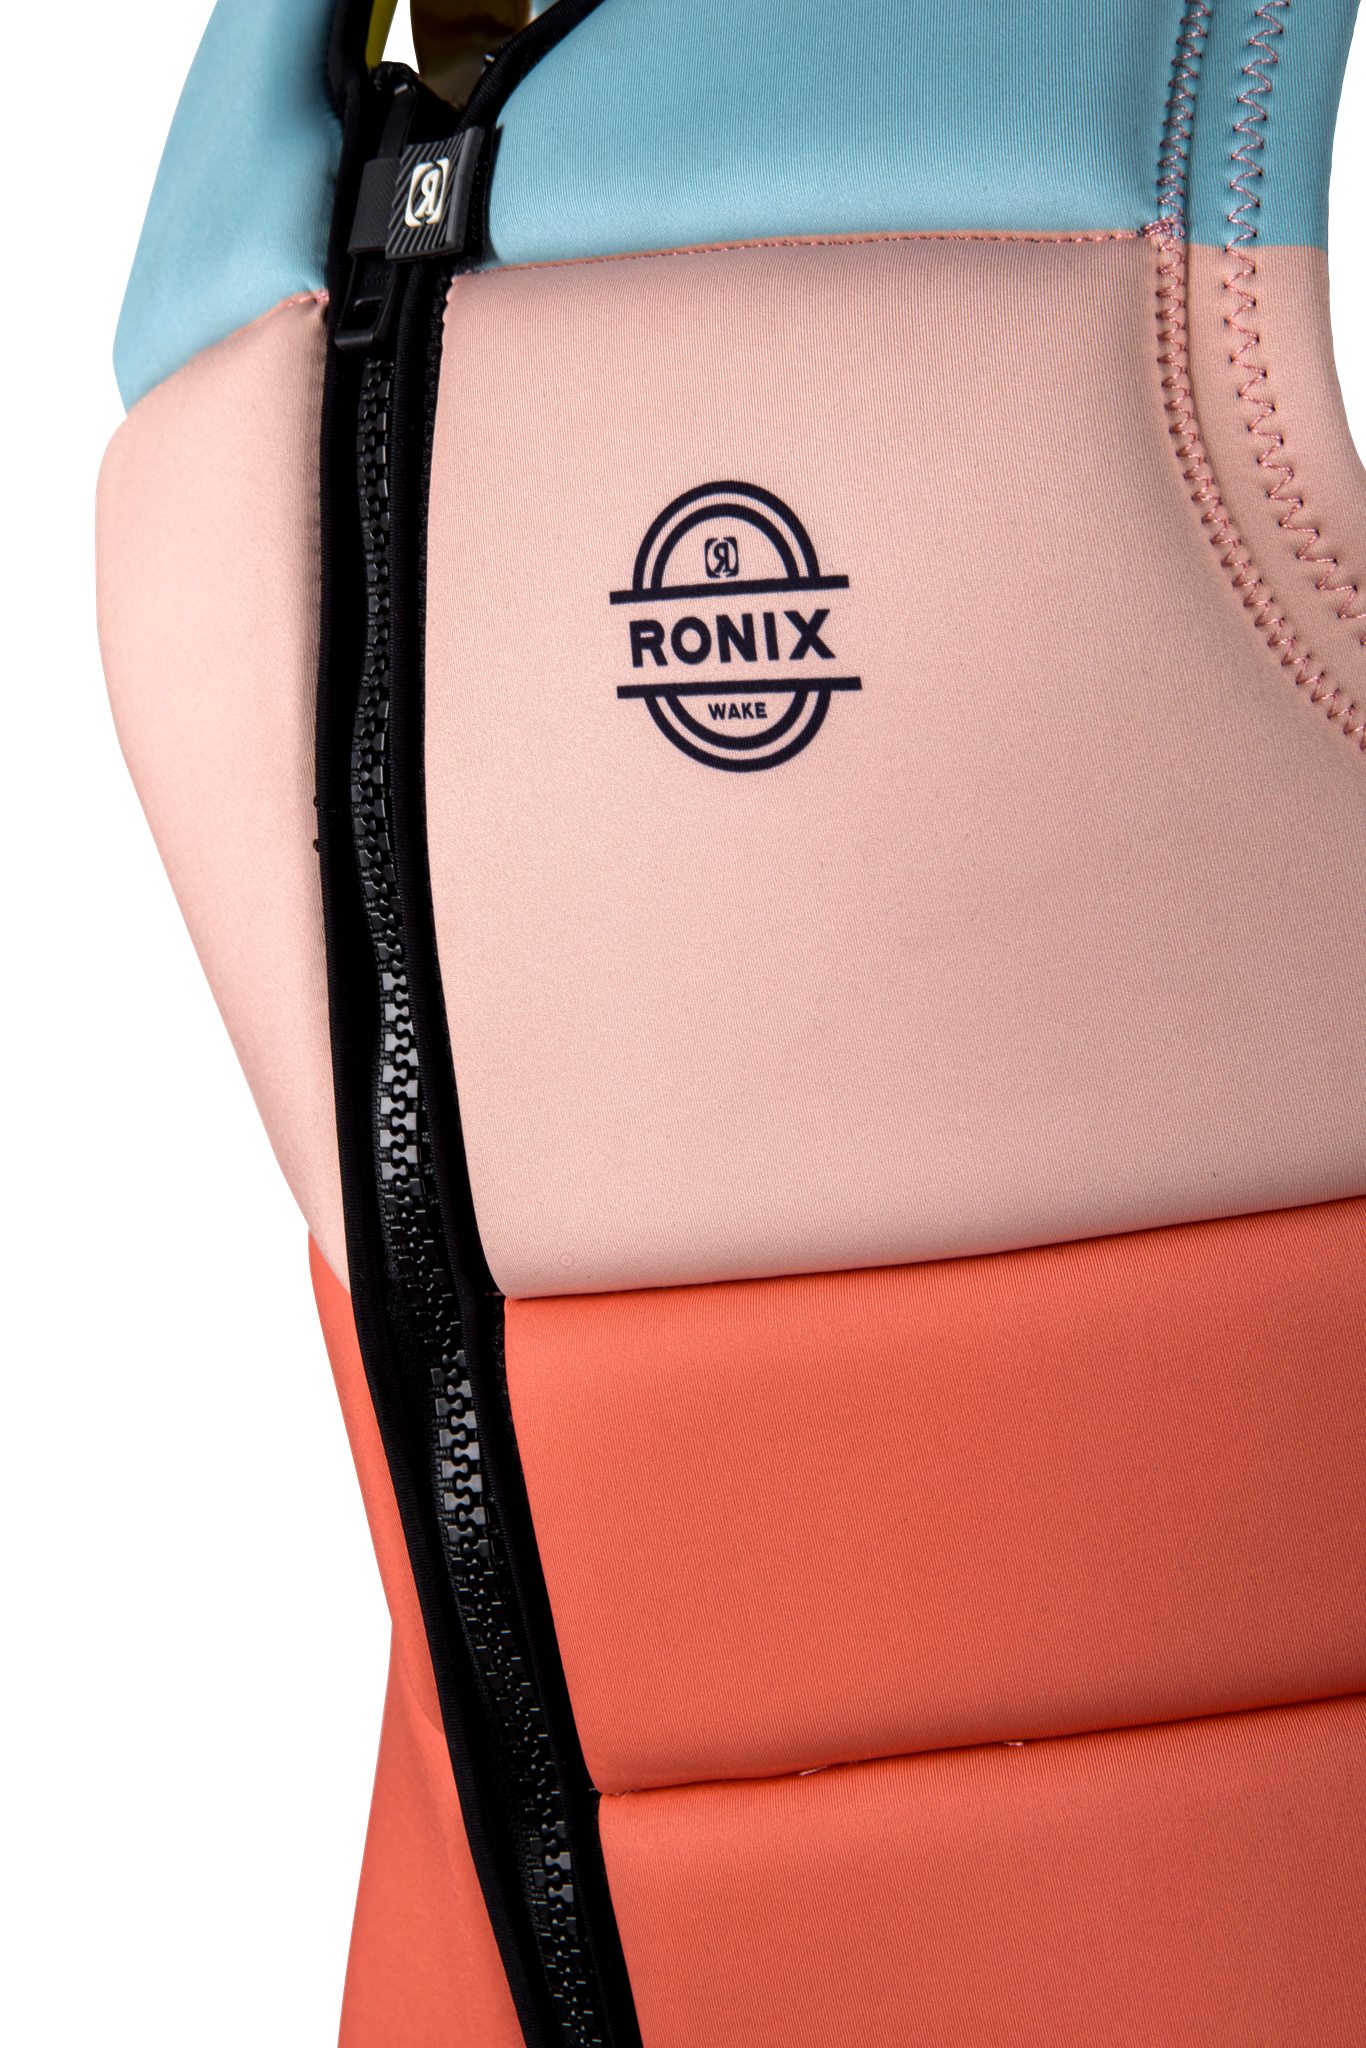 Ronix CE approved women's life jacket with flex foam for impact protection.